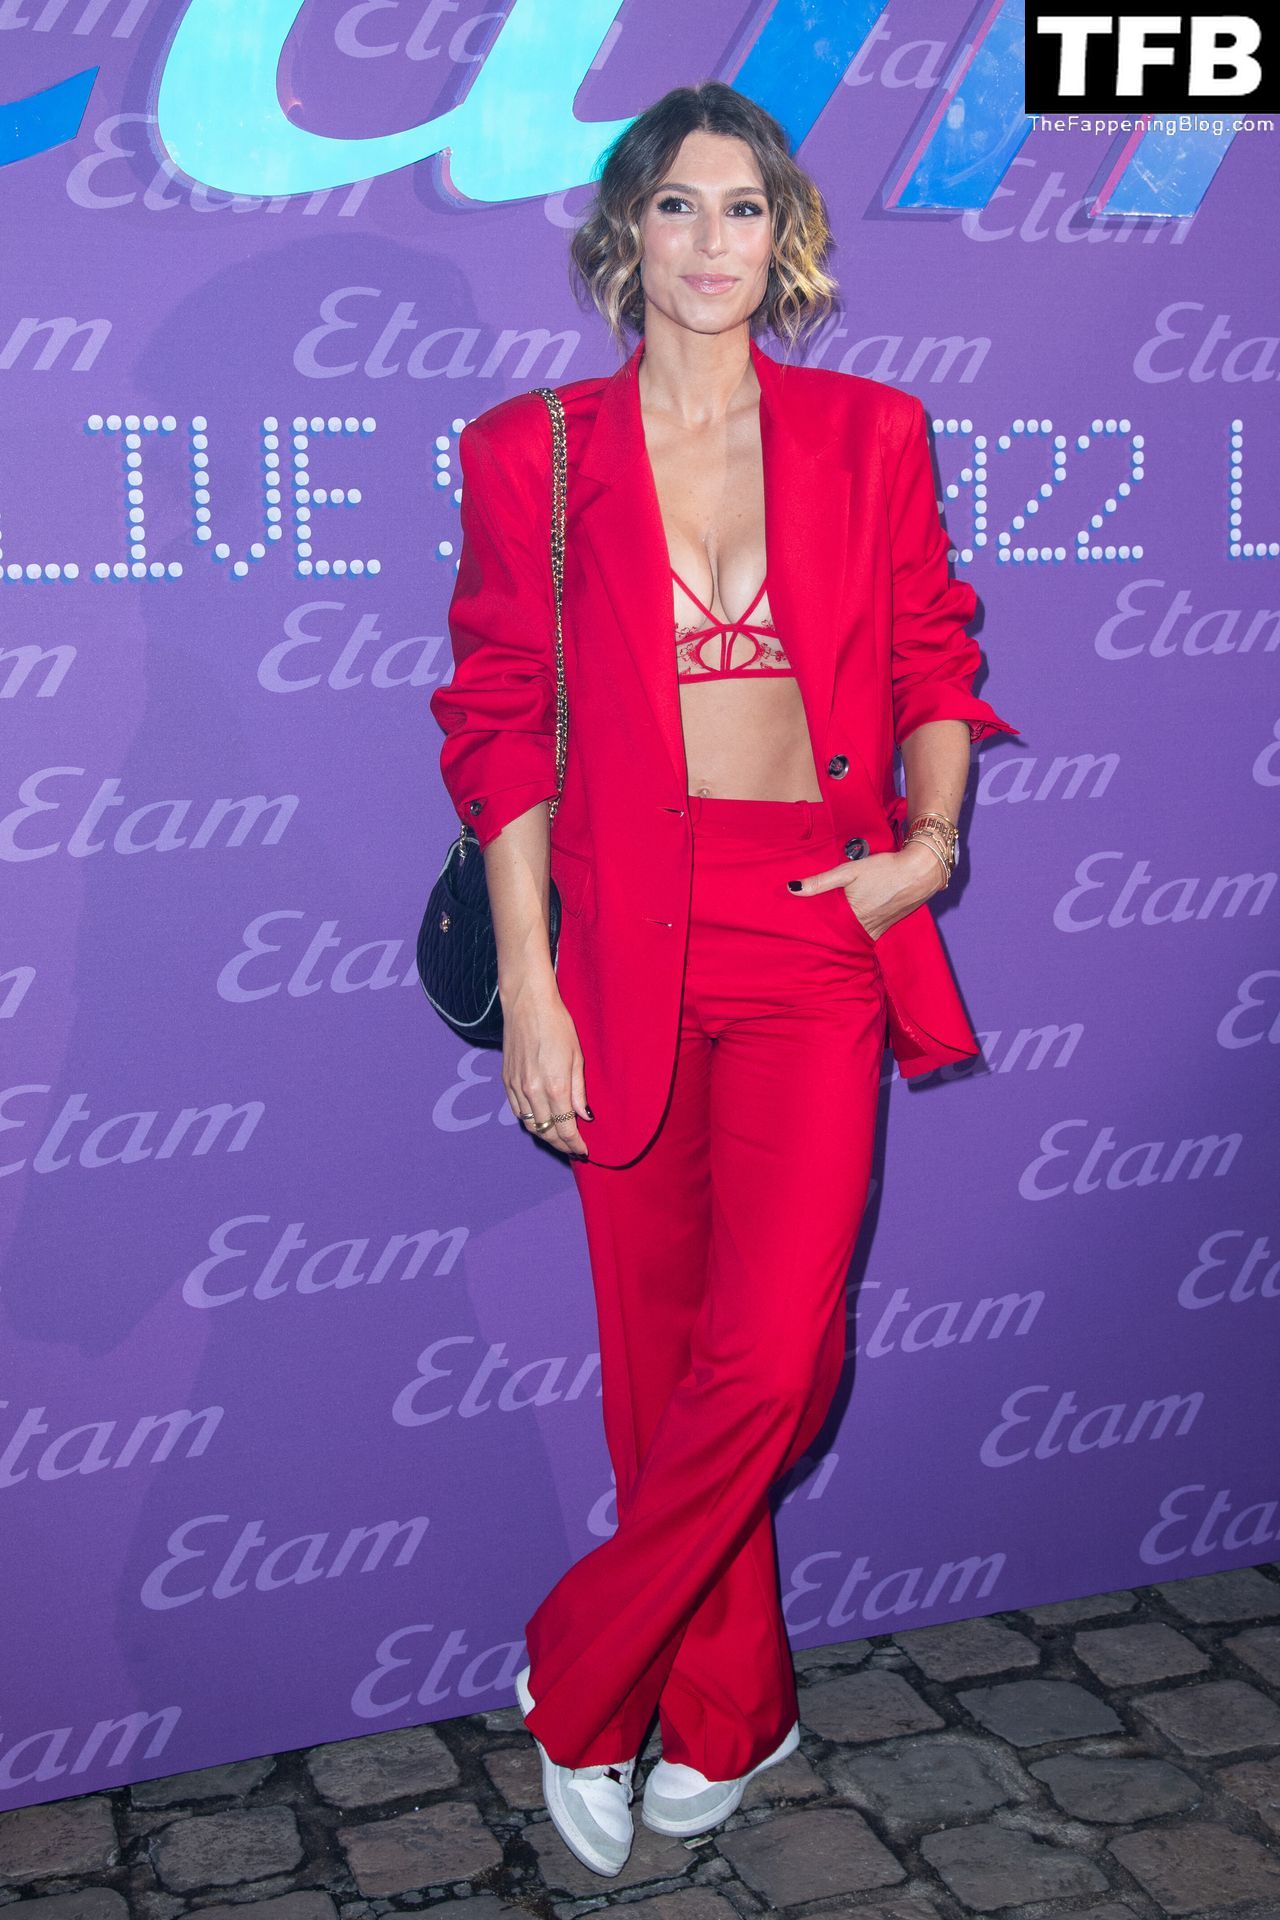 Laury Thilleman Displays Her Sexy Tits at the Etam Womenswear Show (30 Photos)